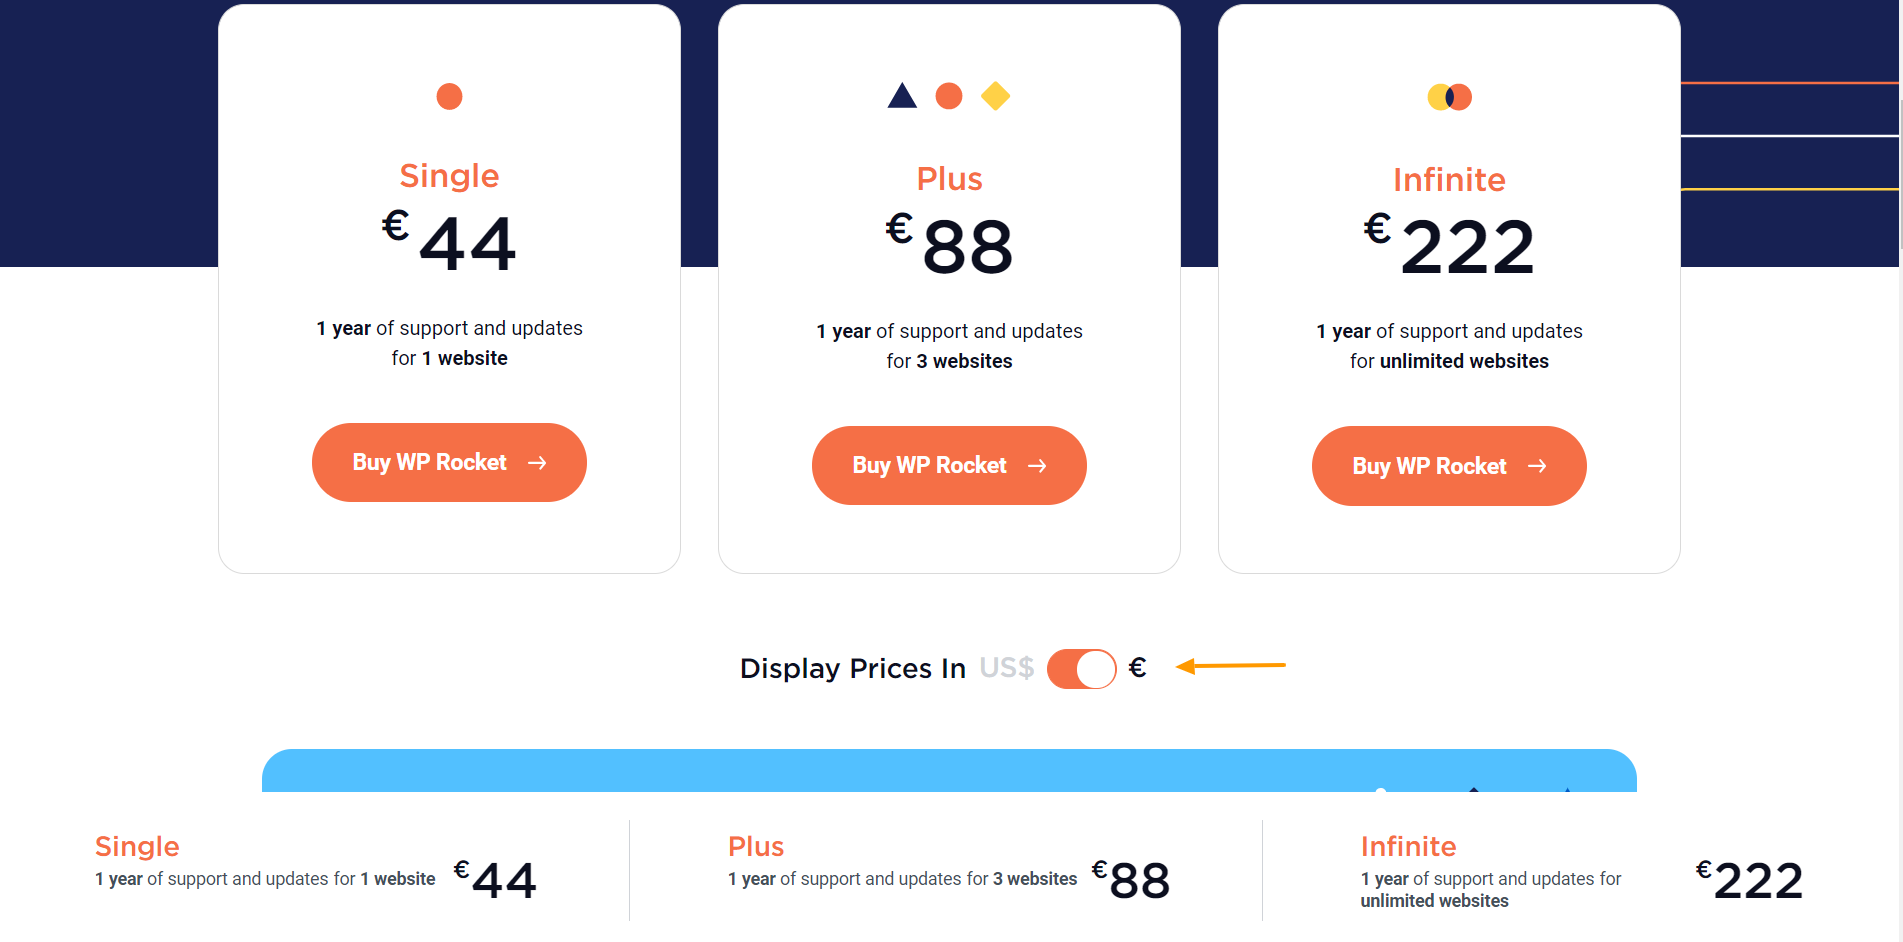 WPRocket's pricing page with comparison between 3 products